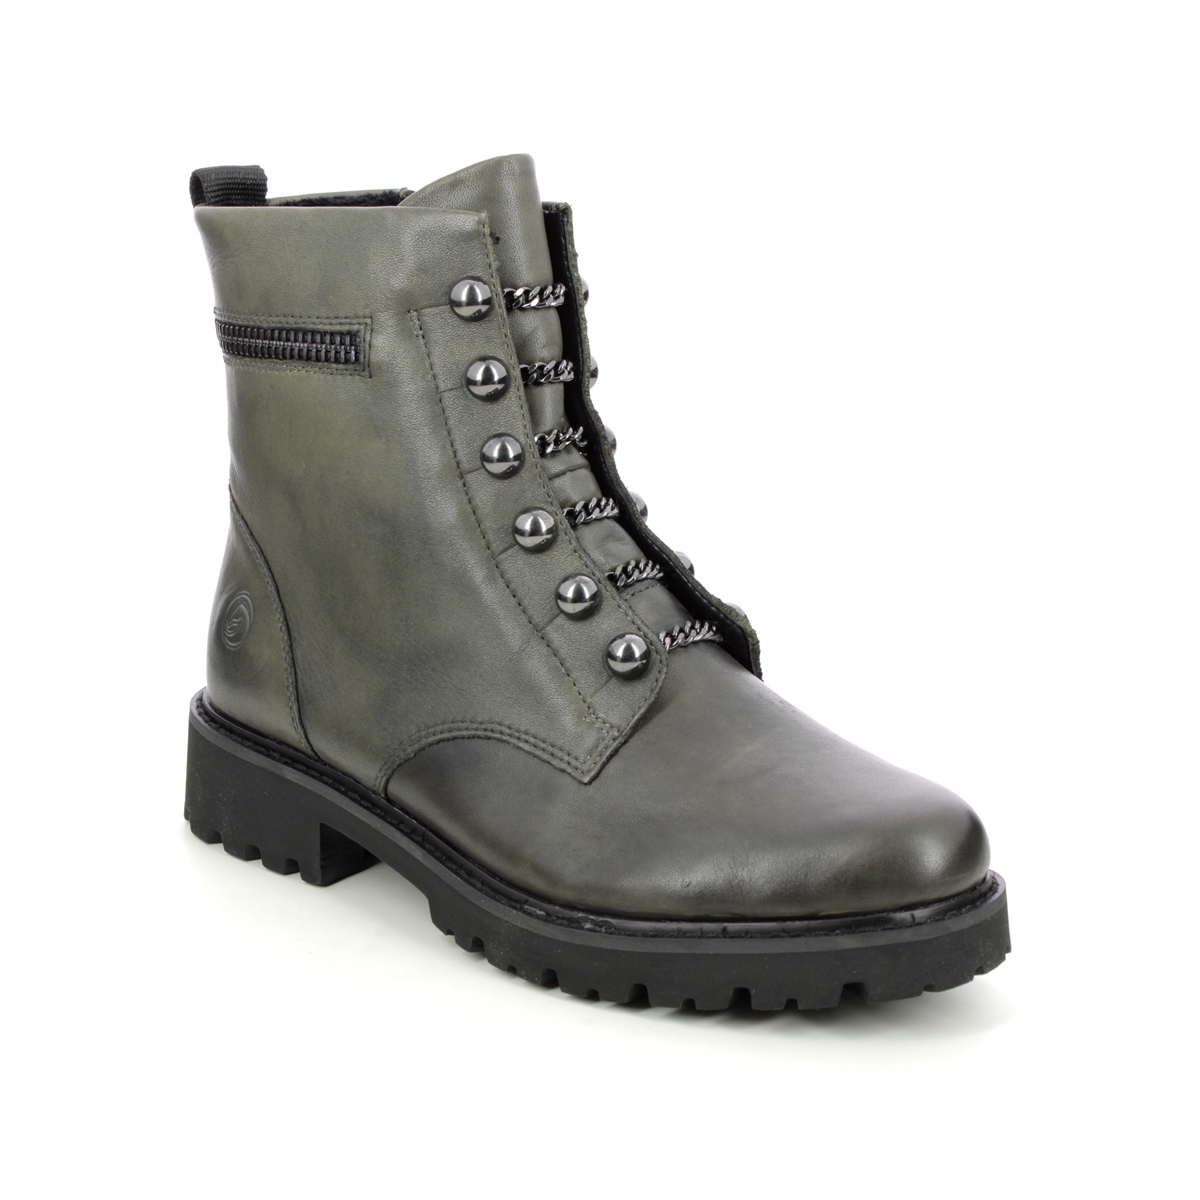 Remonte Docland Olive Leather Womens Biker Boots D8670-52 In Size 41 In Plain Olive Leather